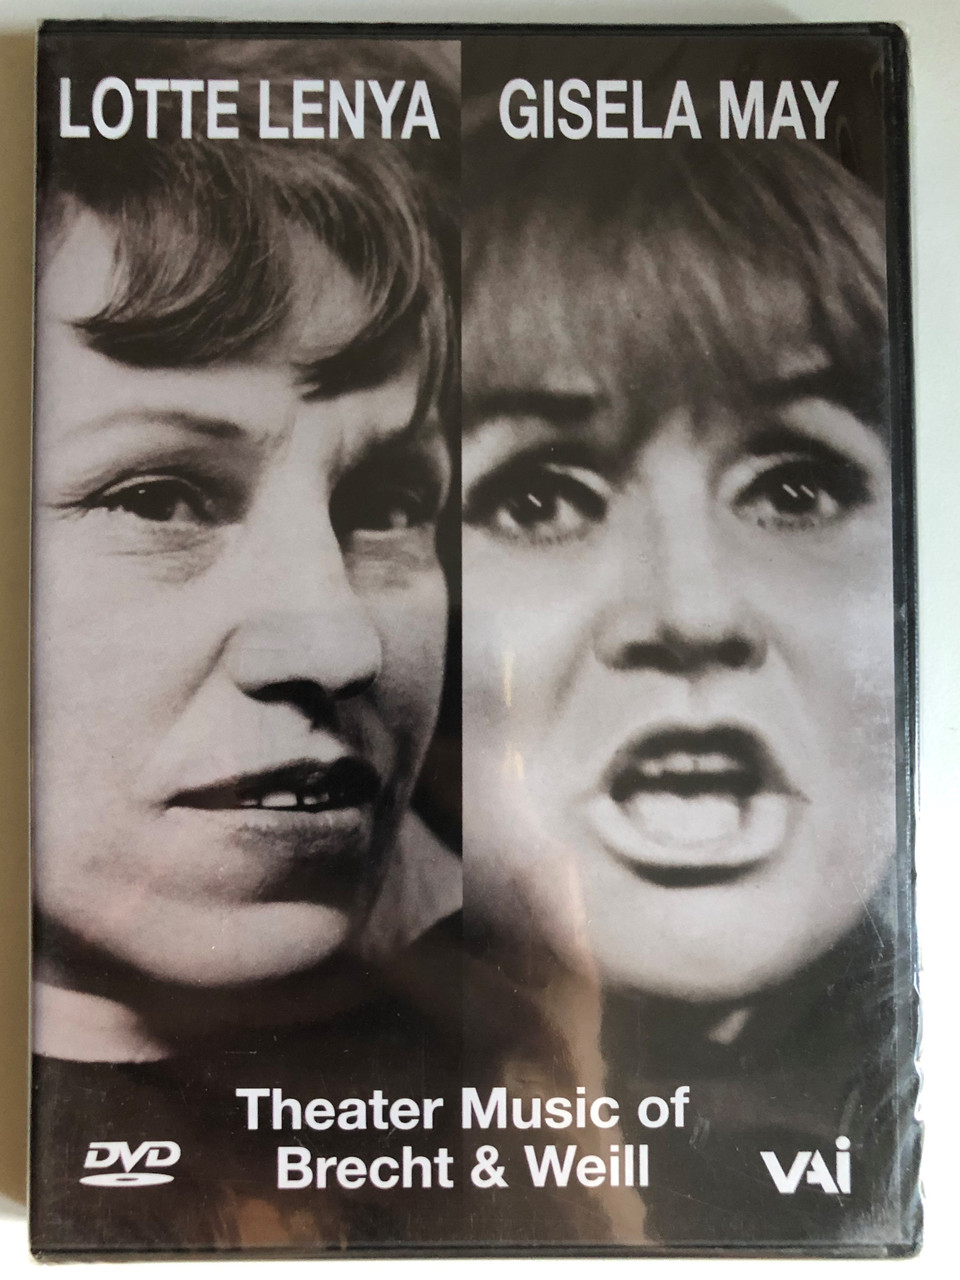 Lotte_Lenya_and_Gisela_May_-_Theater_Songs_of_Brecht_and_Weill_Theater_Music_of_Brecht_and_Weill_Including_performances_by_Martha_Schlamme_and_Will_Holt_Packaging_design_and___05606.1691835113.1280.1280.JPG (960×1280)